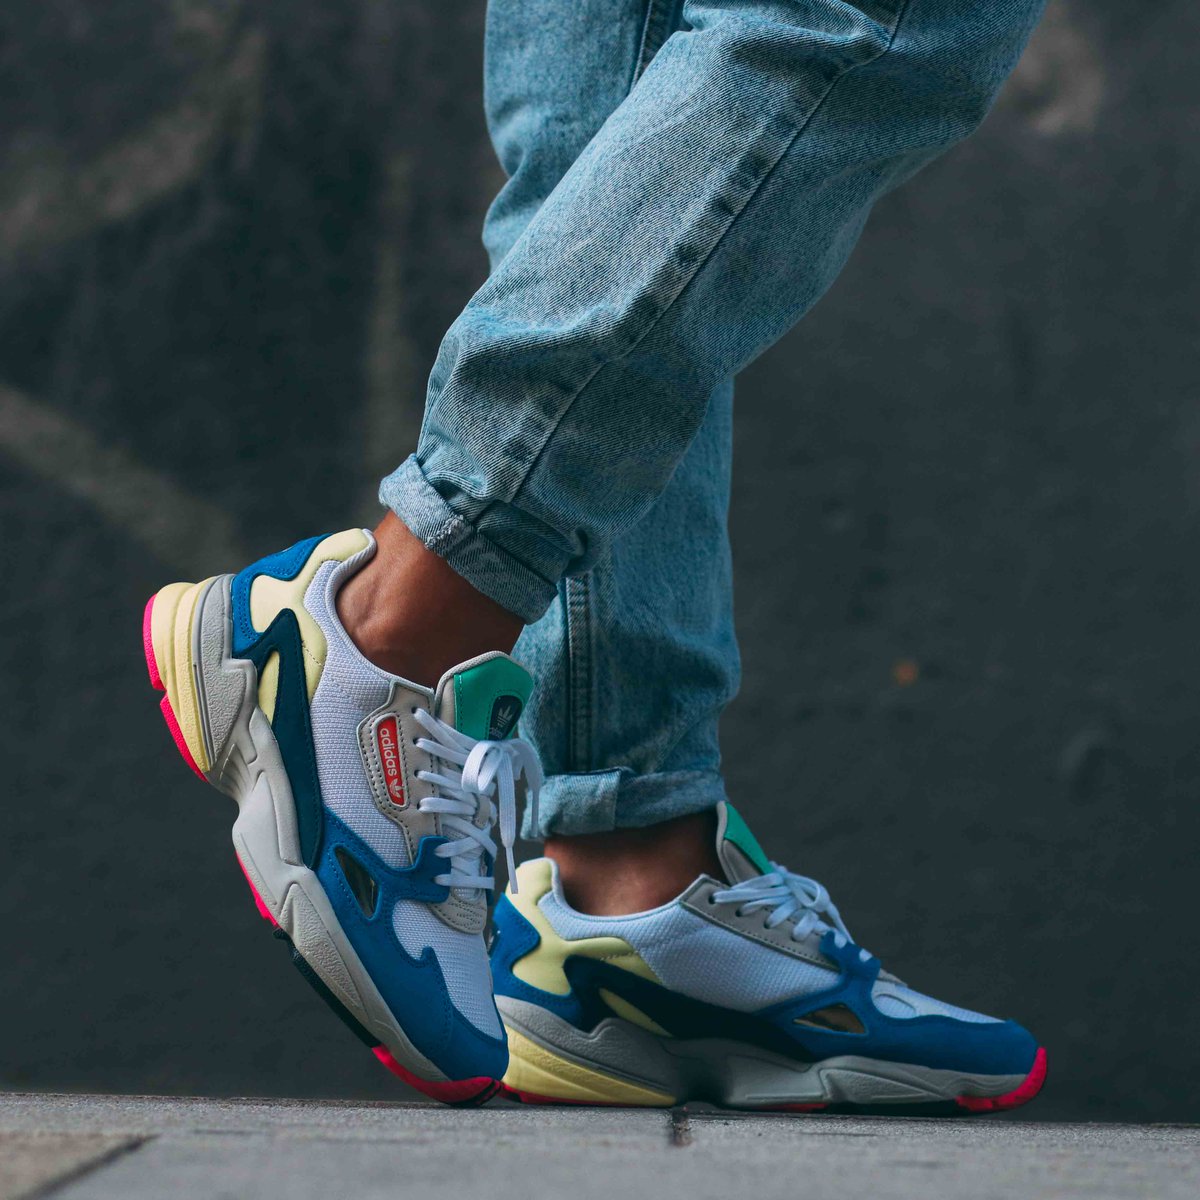 The adidas Falcon is swooping down \u0026 